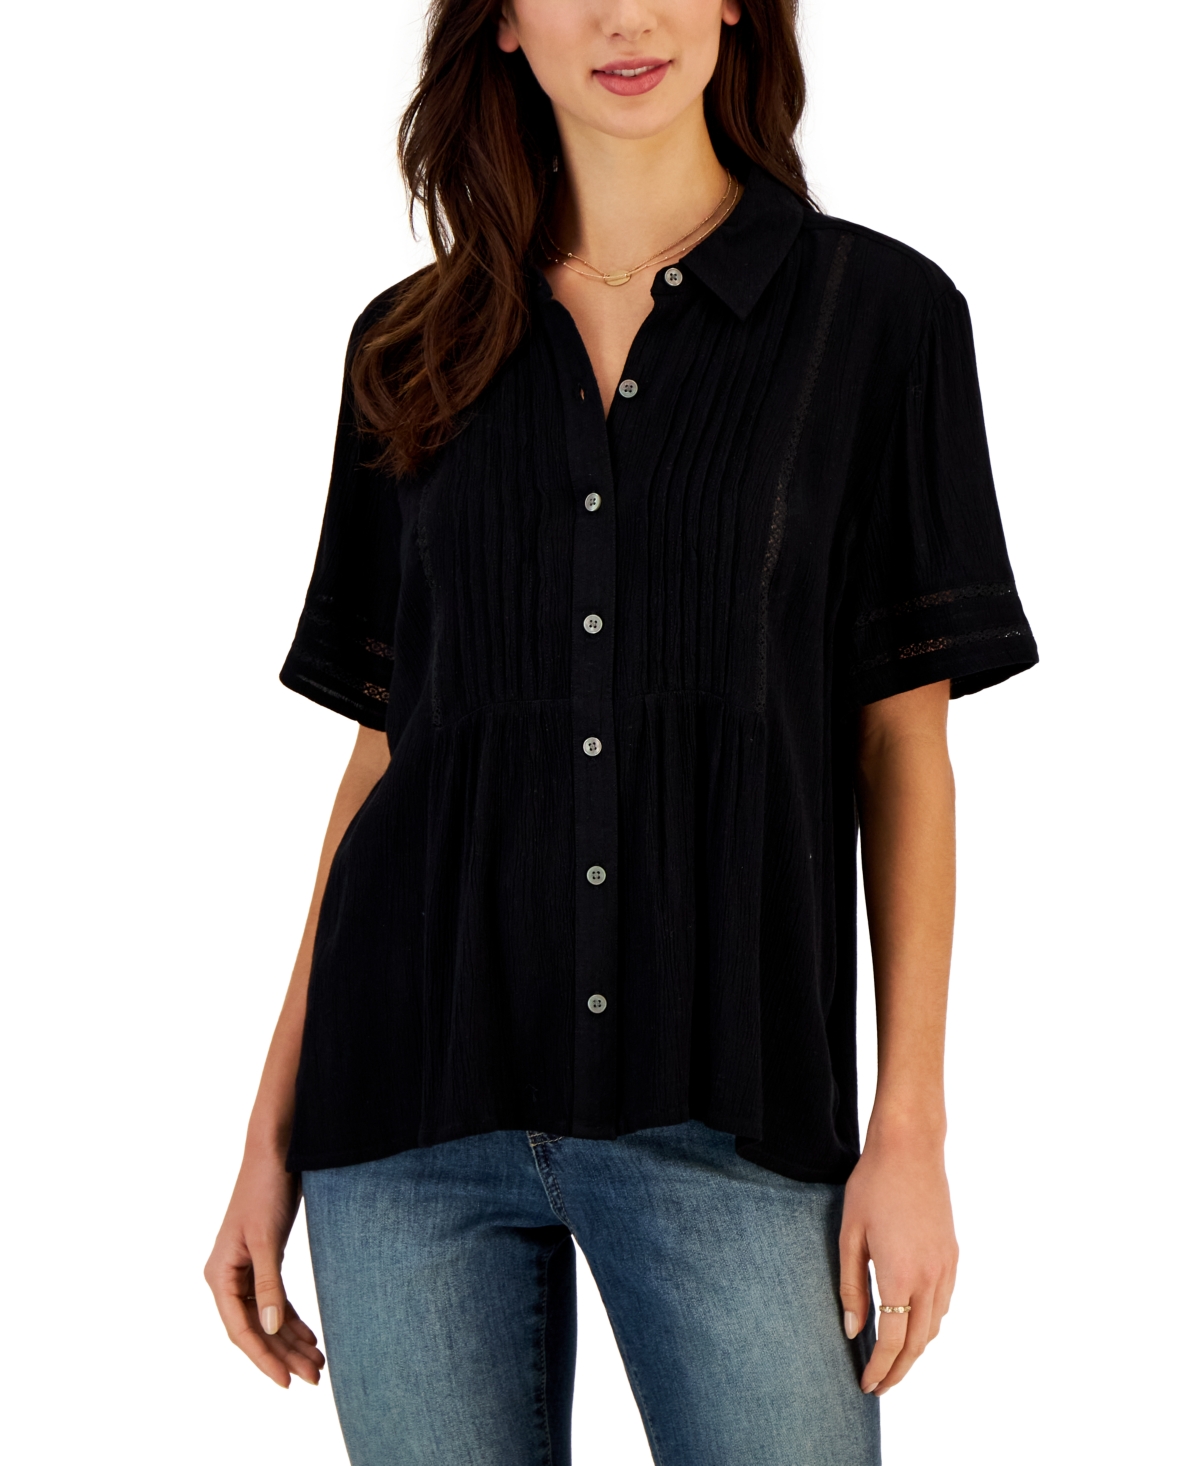 STYLE & CO WOMEN'S PINTUCK SHORT-SLEEVE BUTTON-FRONT SHIRT, CREATED FOR MACY'S